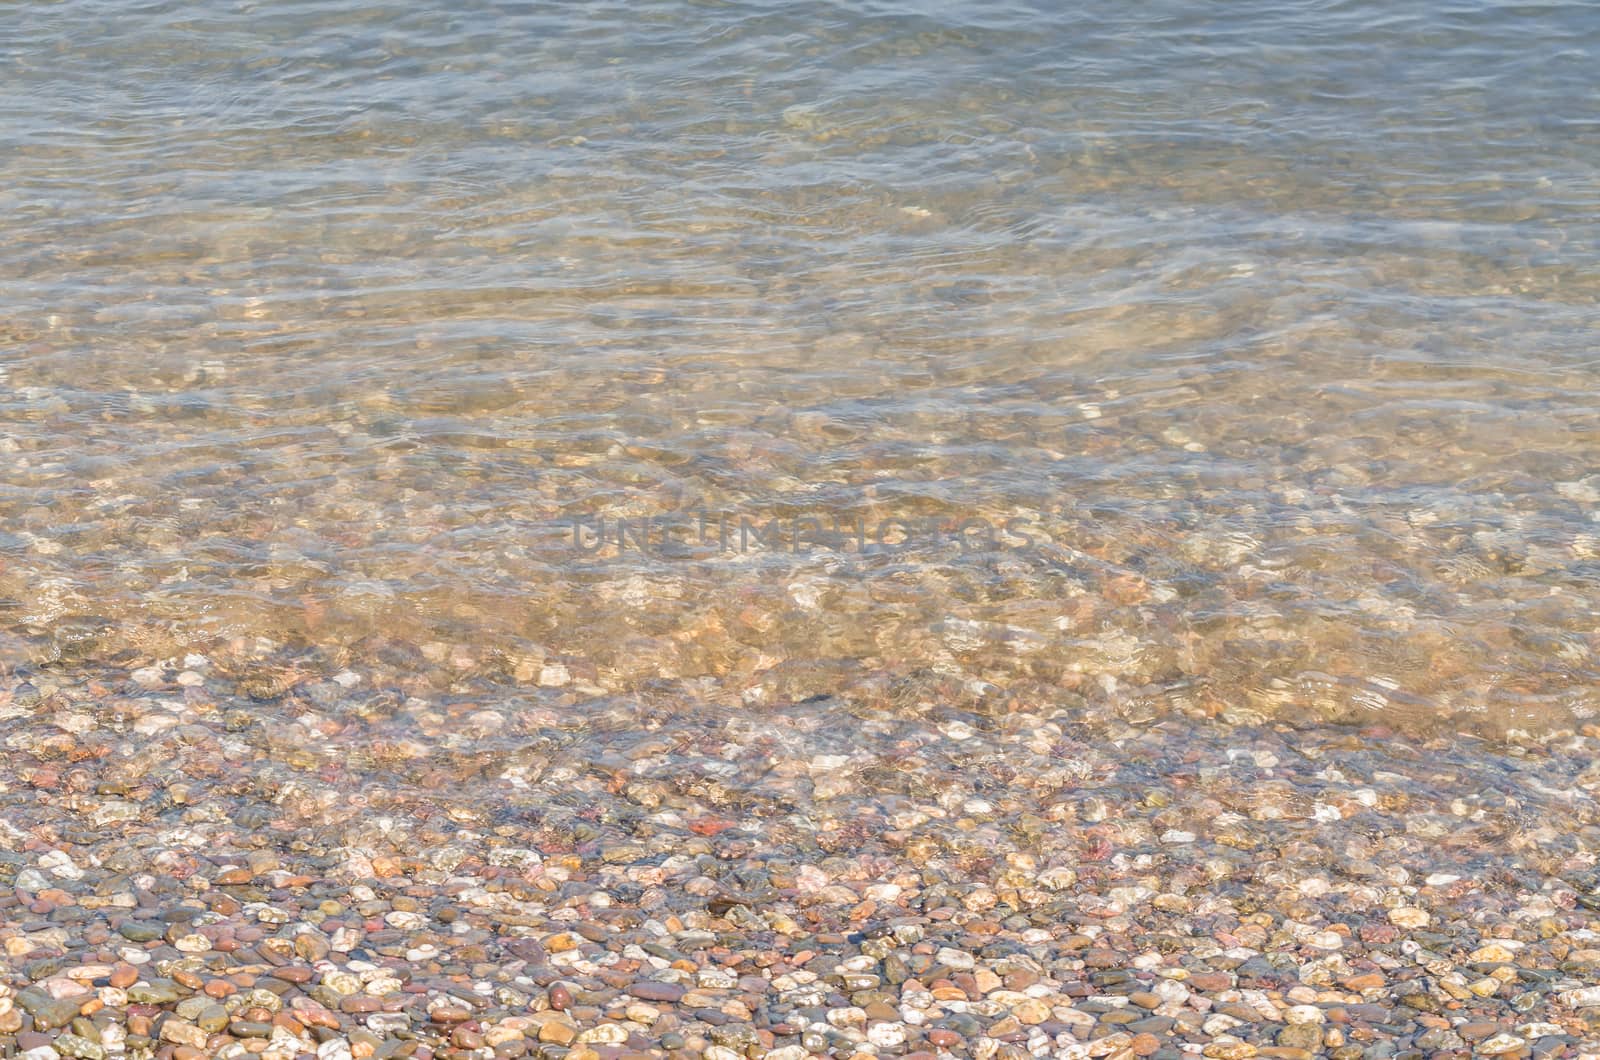 Riverside landscape, view of small pebbles in a clear river.